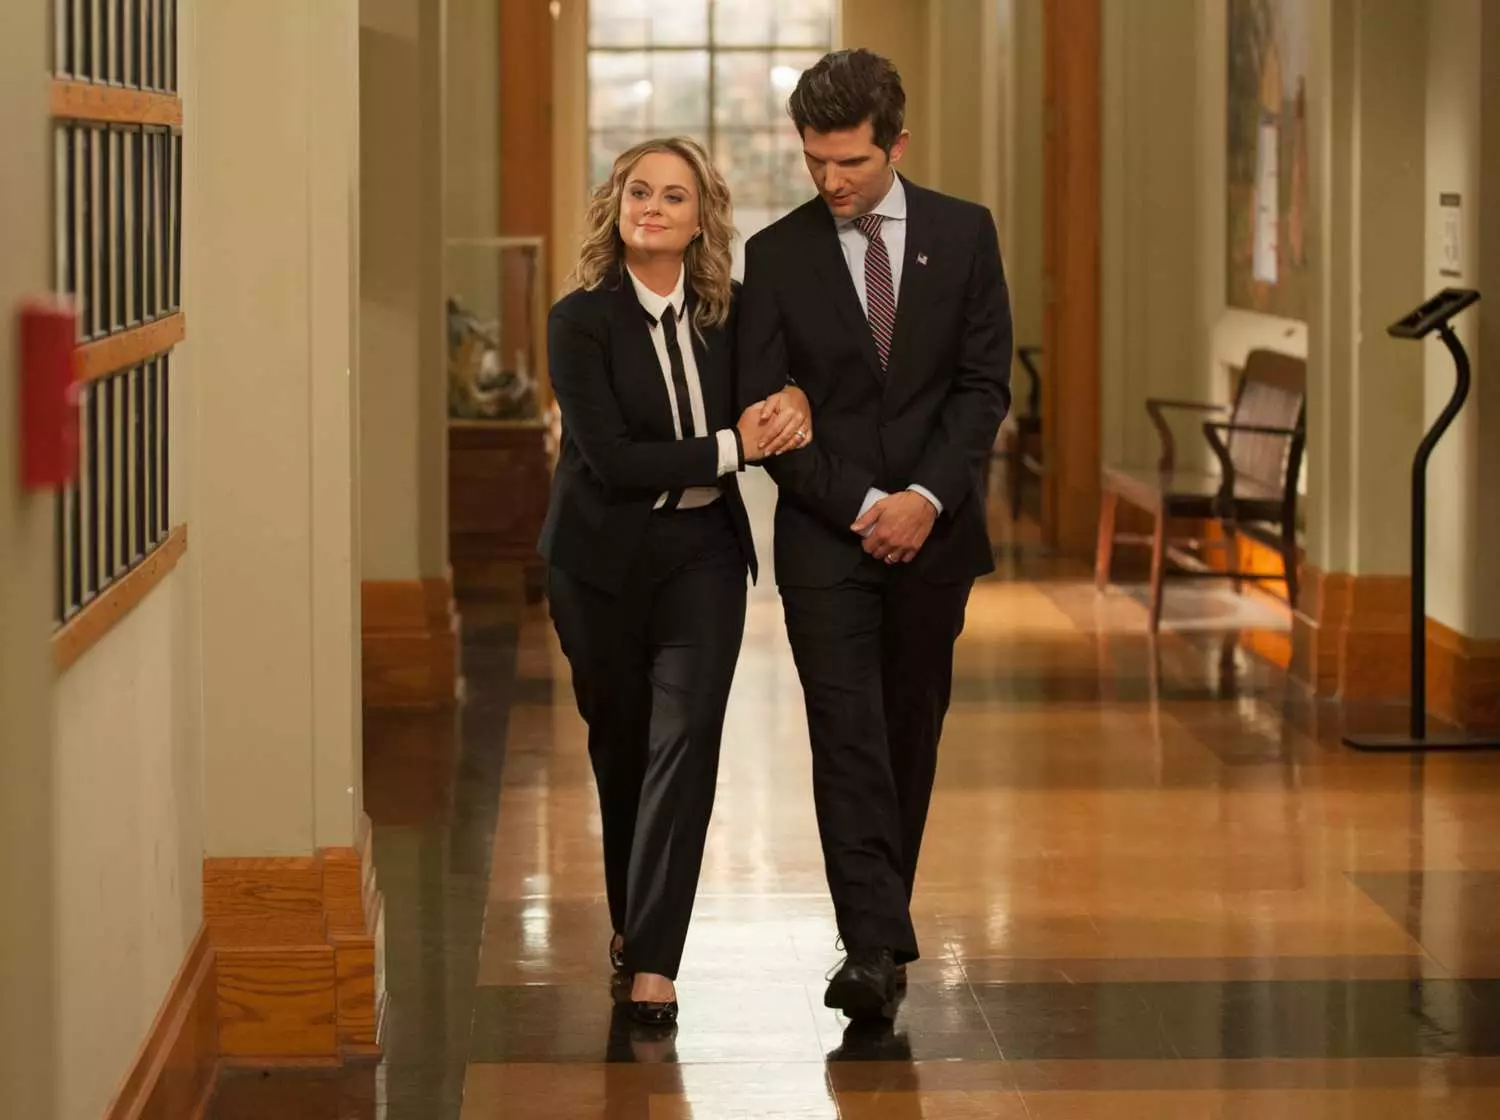 Amy Poehler as Leslie Knope and Adam Scott as Ben Wyatt in Parks and Recreation.